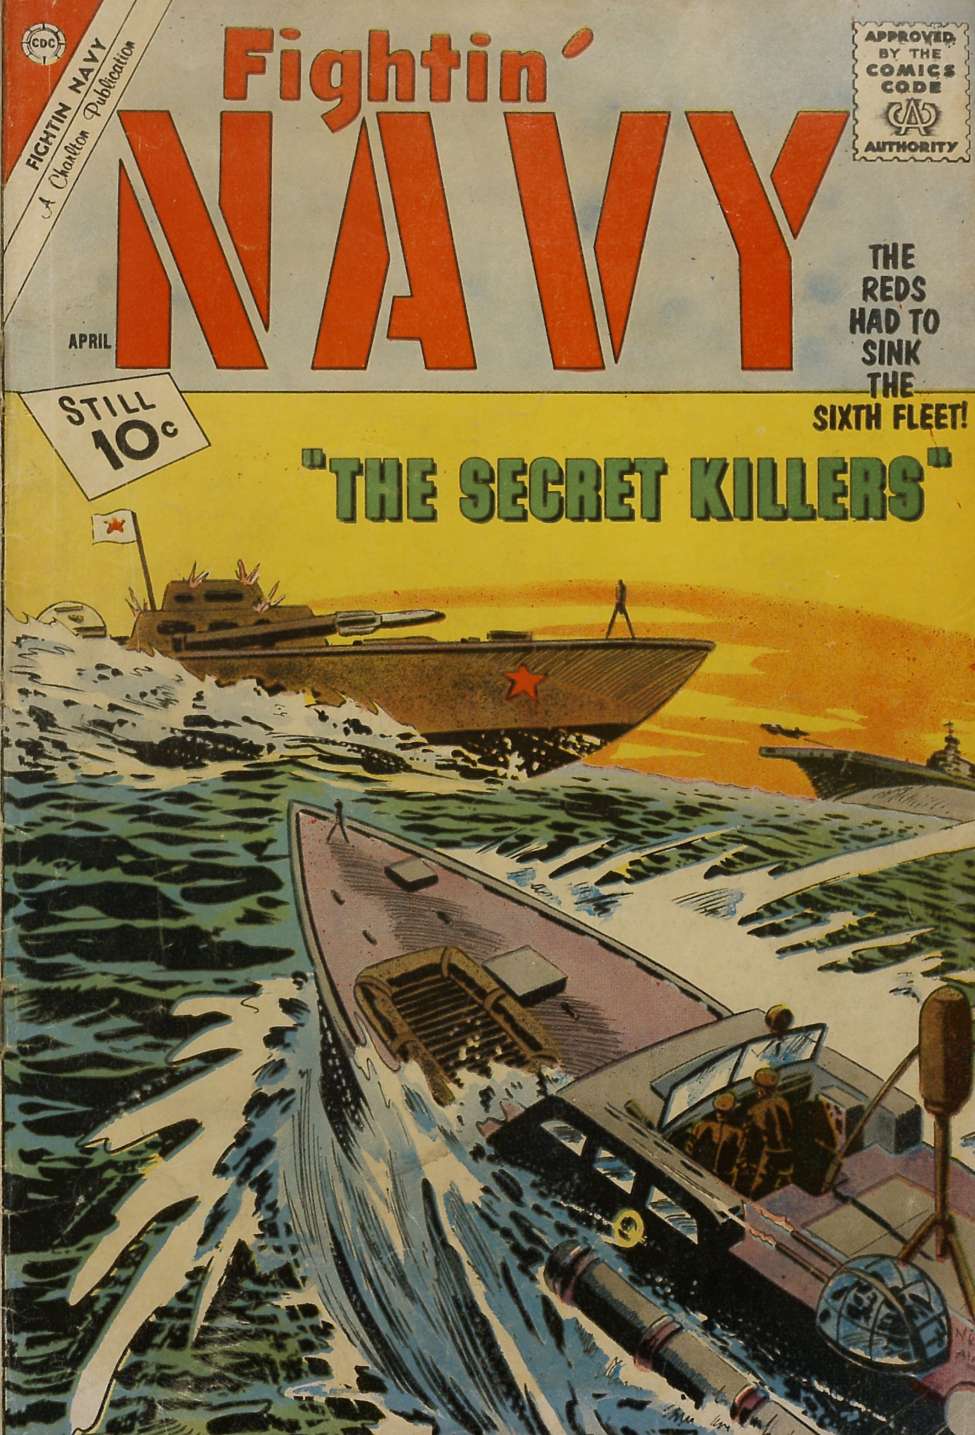 Book Cover For Fightin' Navy 103 (alt) - Version 2